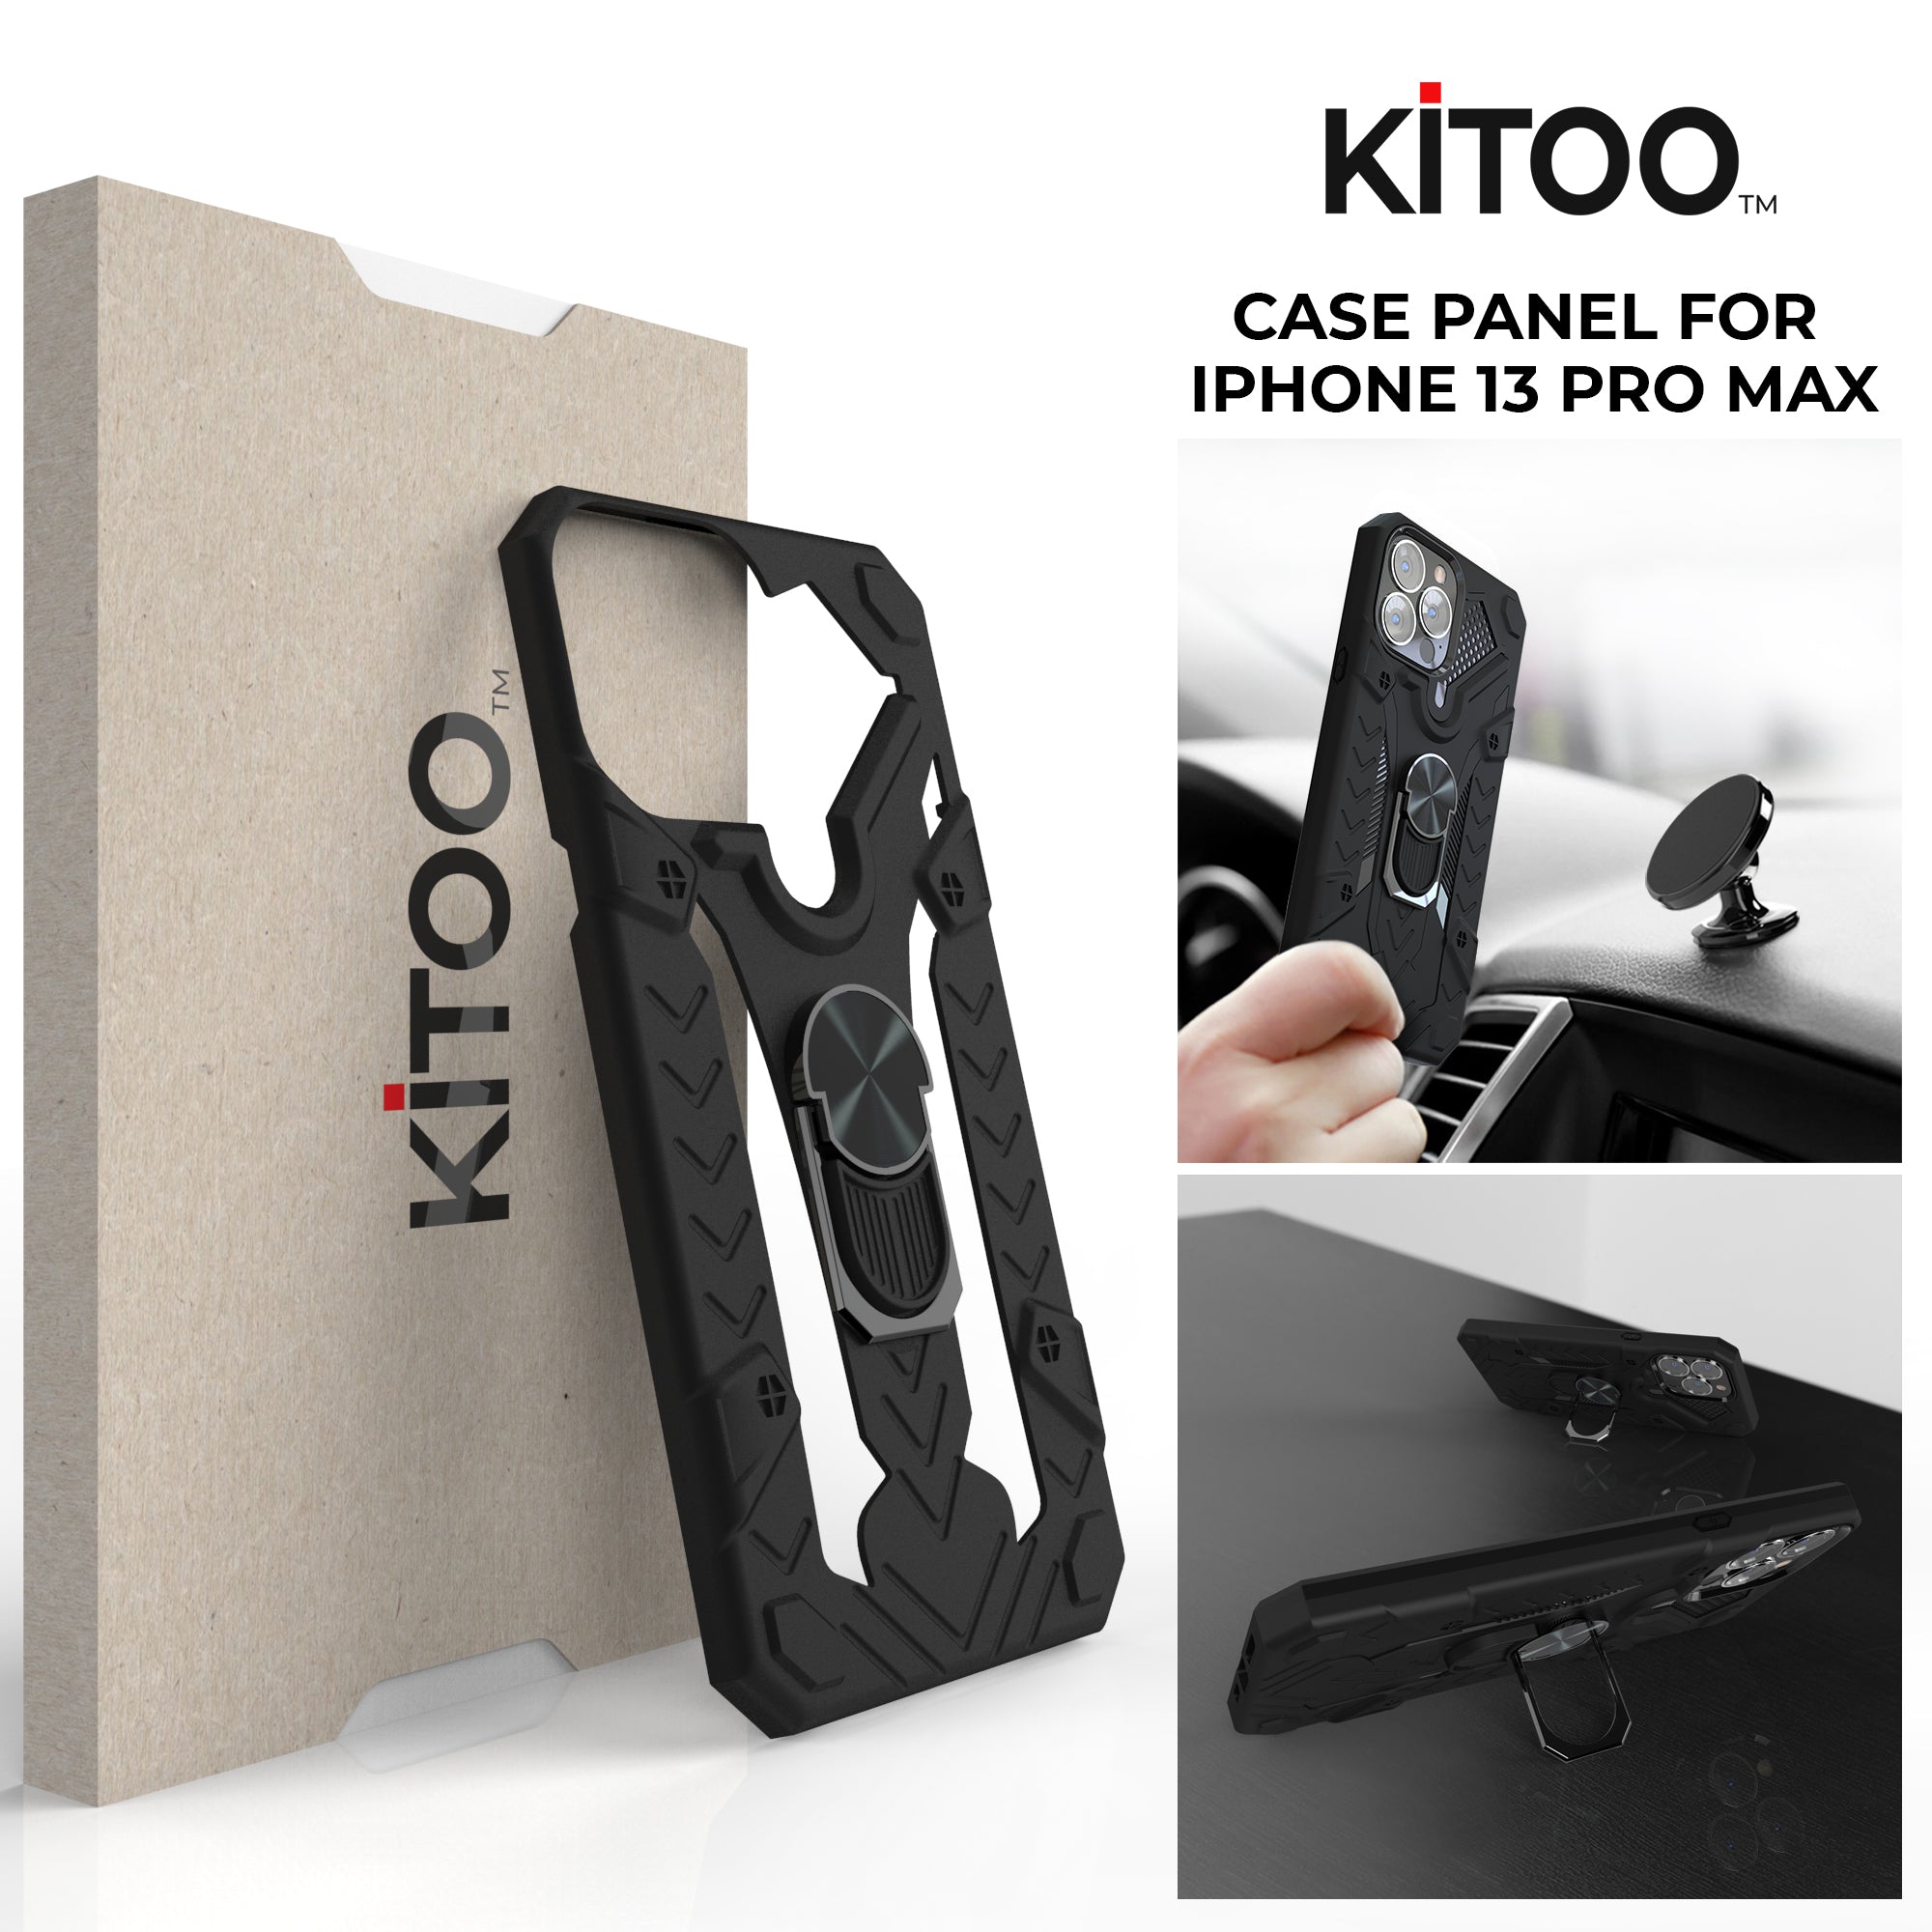 Kitoo Ring Panel Designed for iPhone 13 Pro Max case (Spare Part only) - Black